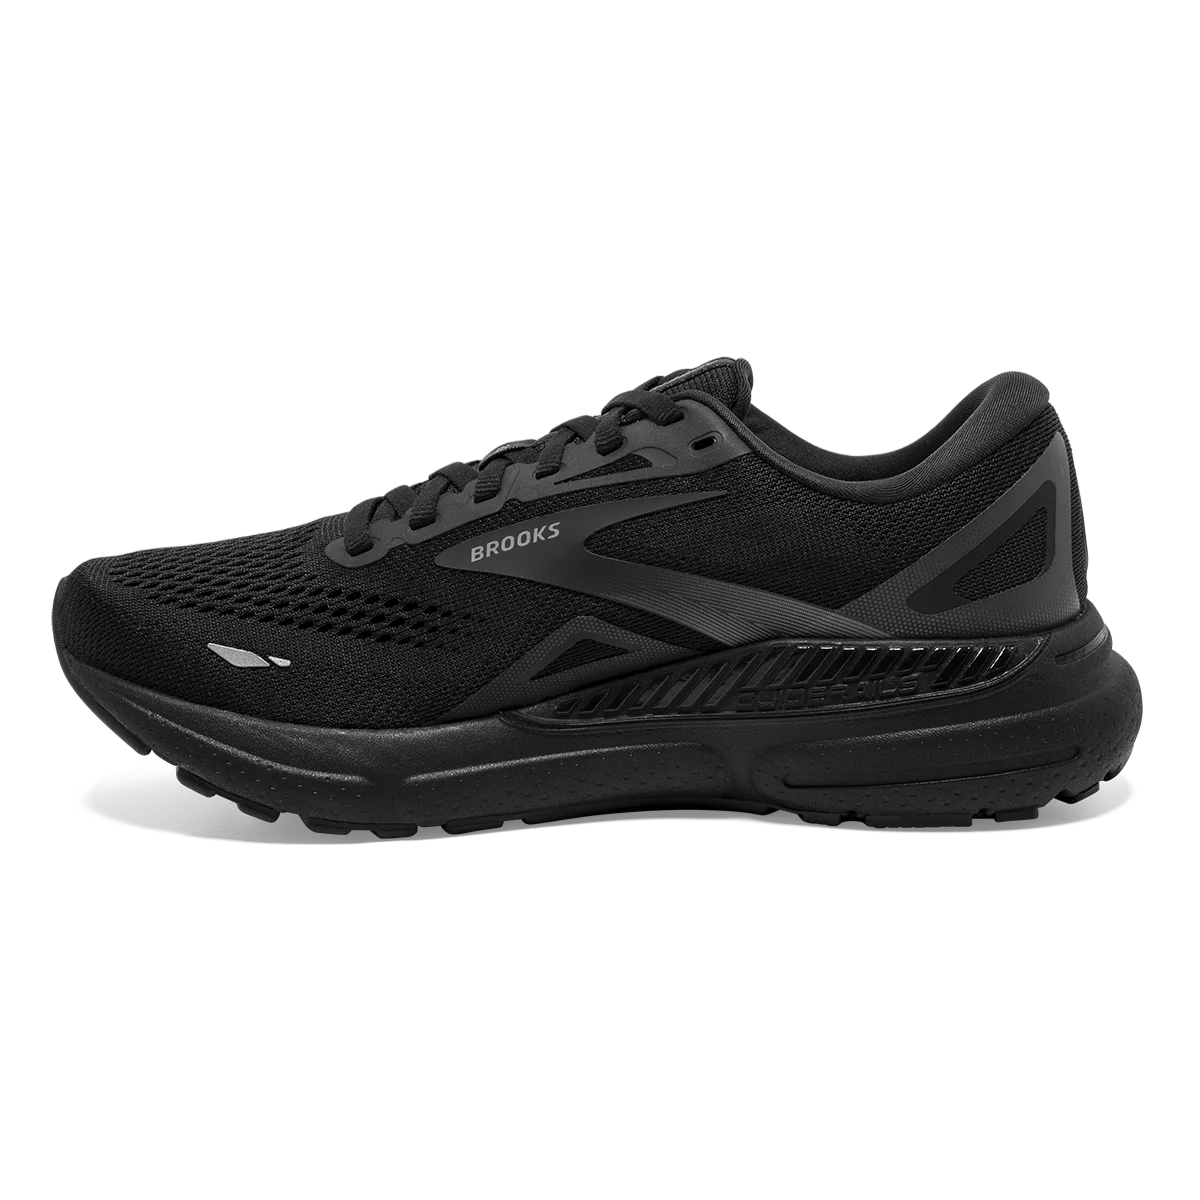 Medial view of the Men's Adrenaline GTS 23 by Brooks in the color Black/Black/Ebony